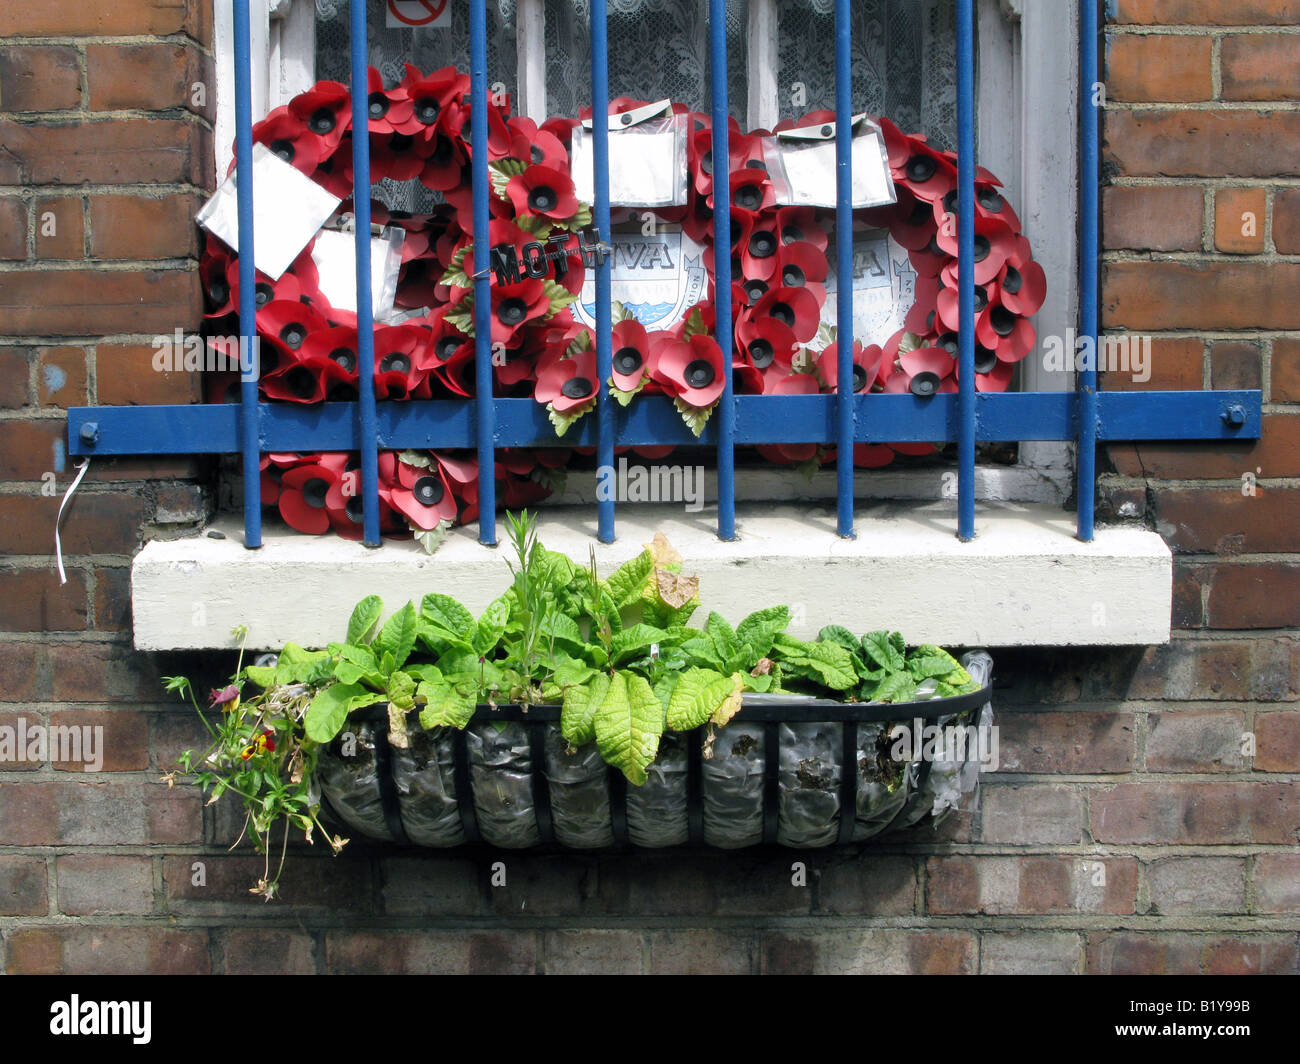 UK British Legion plaque at the Memorable order of Tin Hats office with poppies on window , London. Photo © Julio Etchart Stock Photo